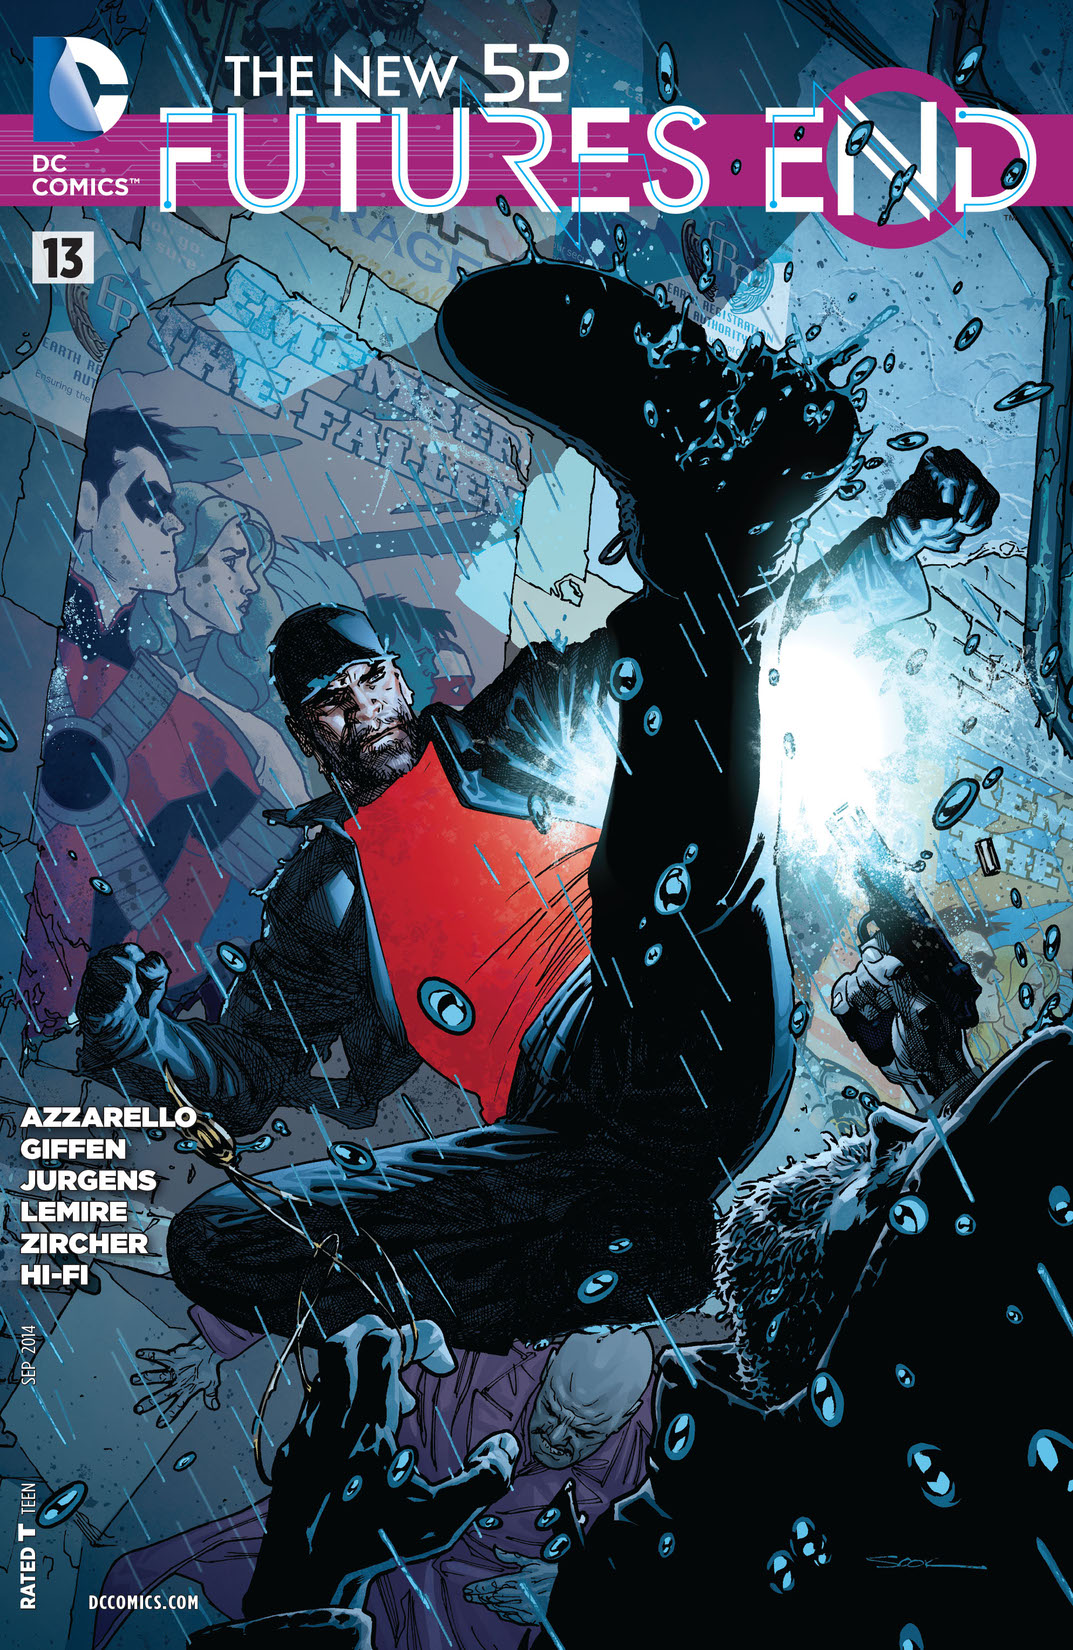 The New 52: Futures End #13 preview images